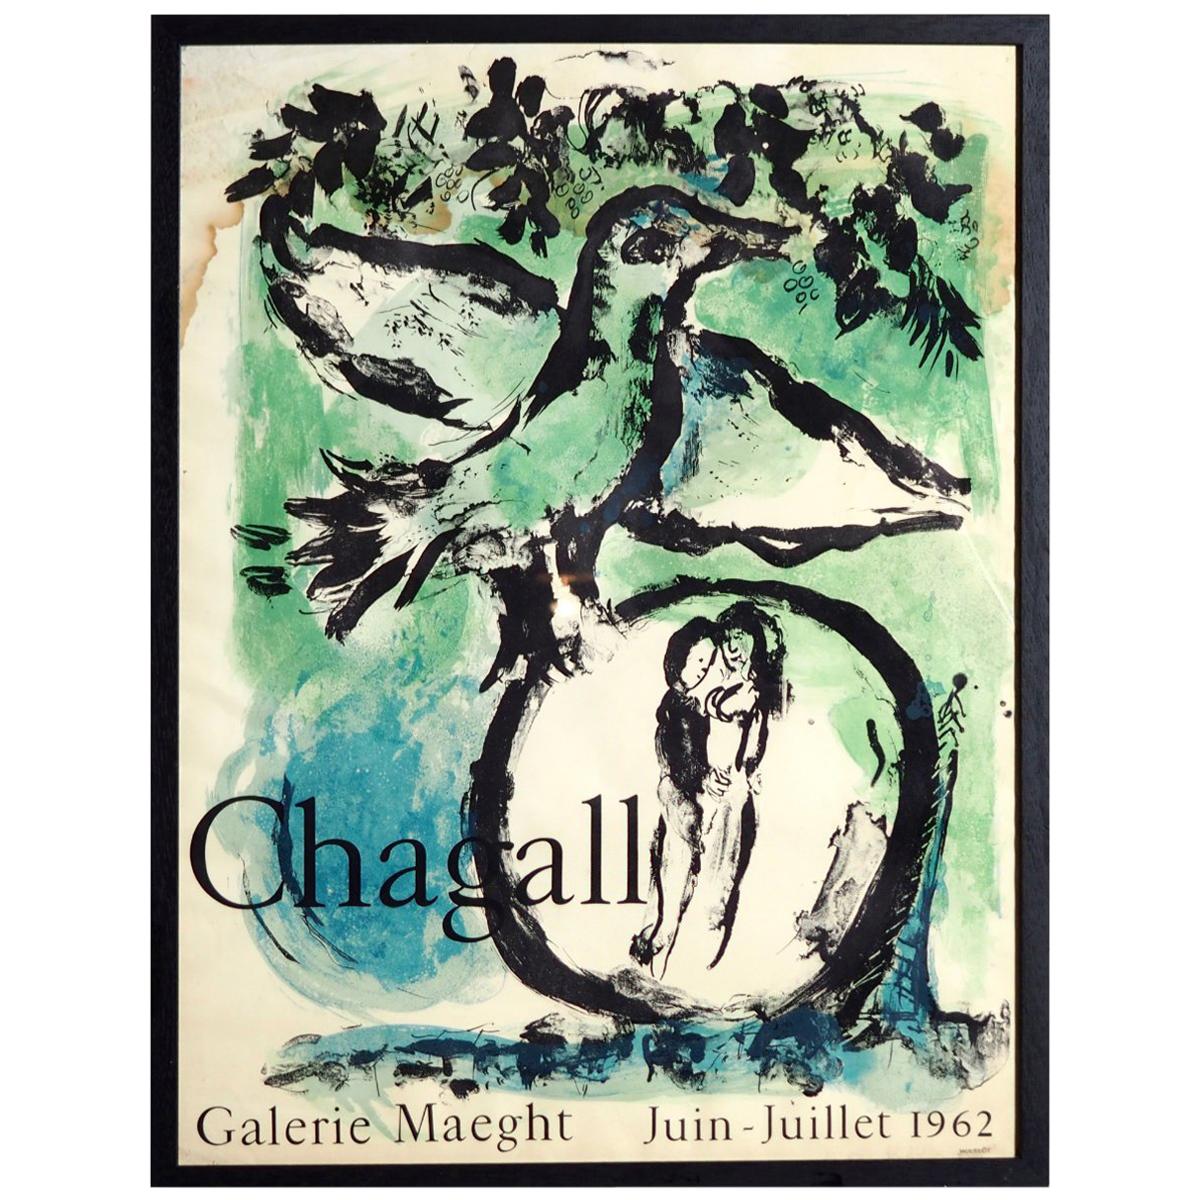 Marc Chagall Exhibition Poster, Galerie Maeght, Mourlot, 1962